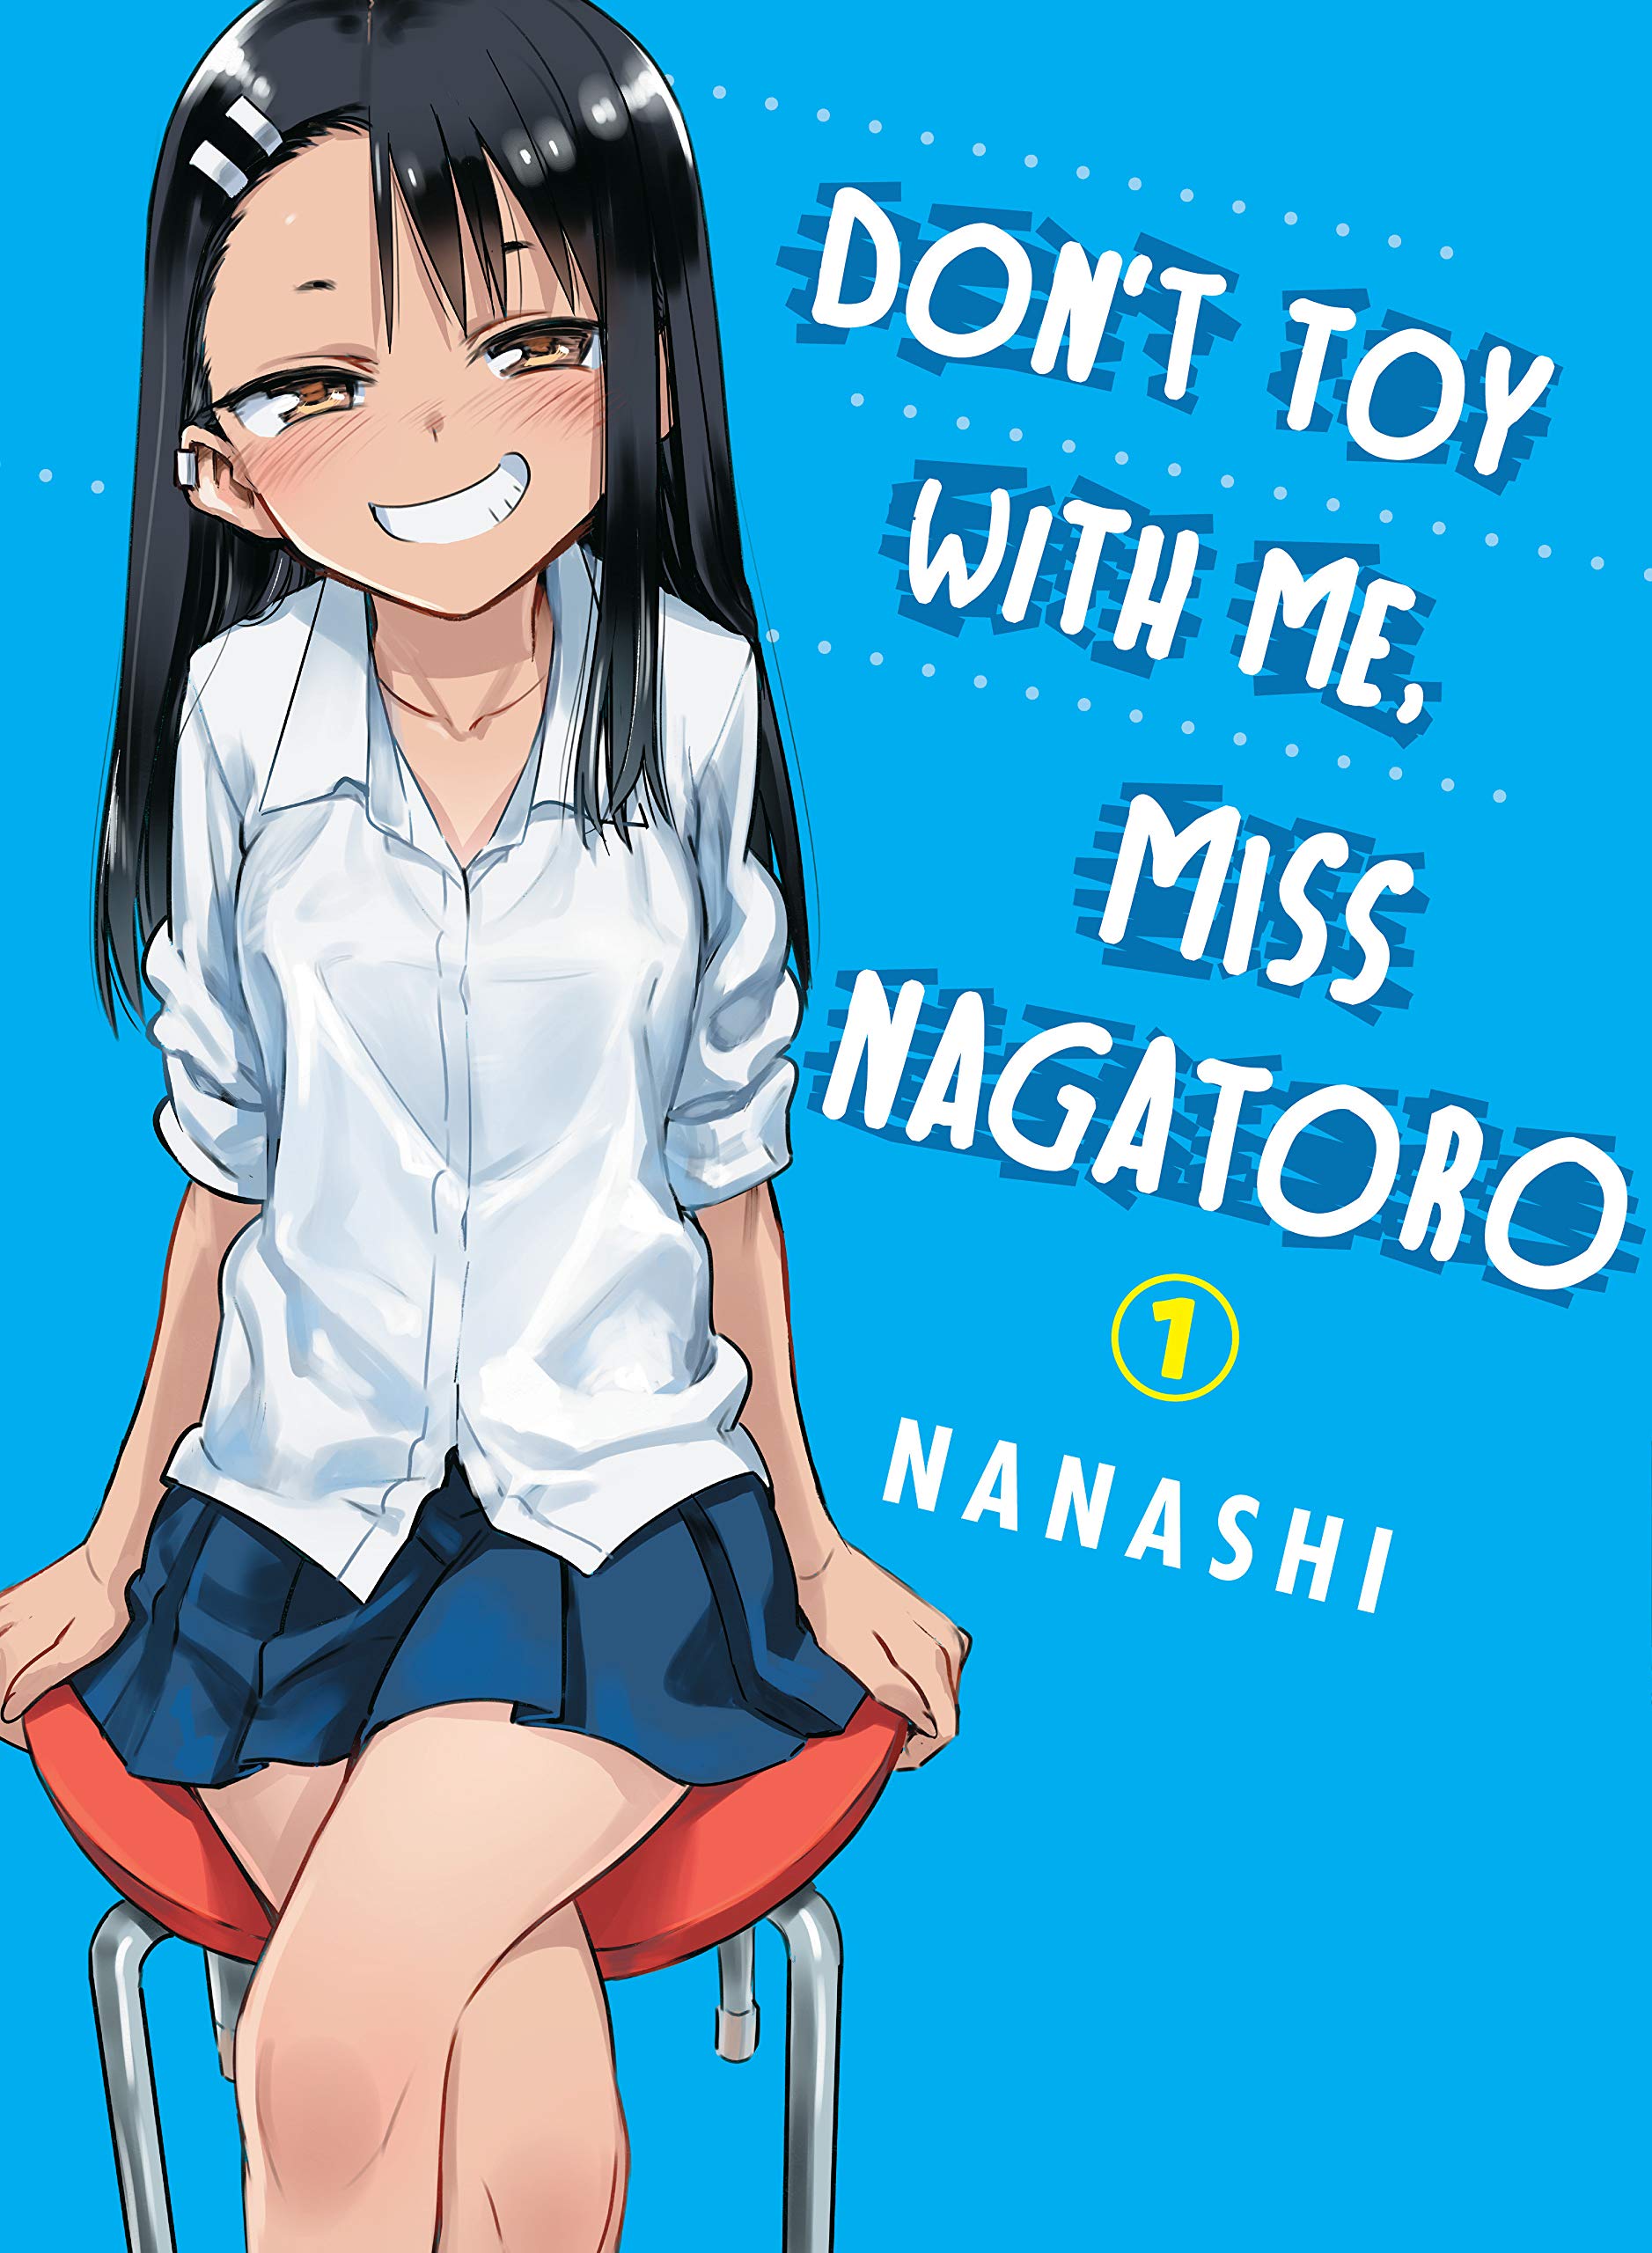 Don't Toy With Me, Miss Nagatoro Anime: Release Date, Expected Plot